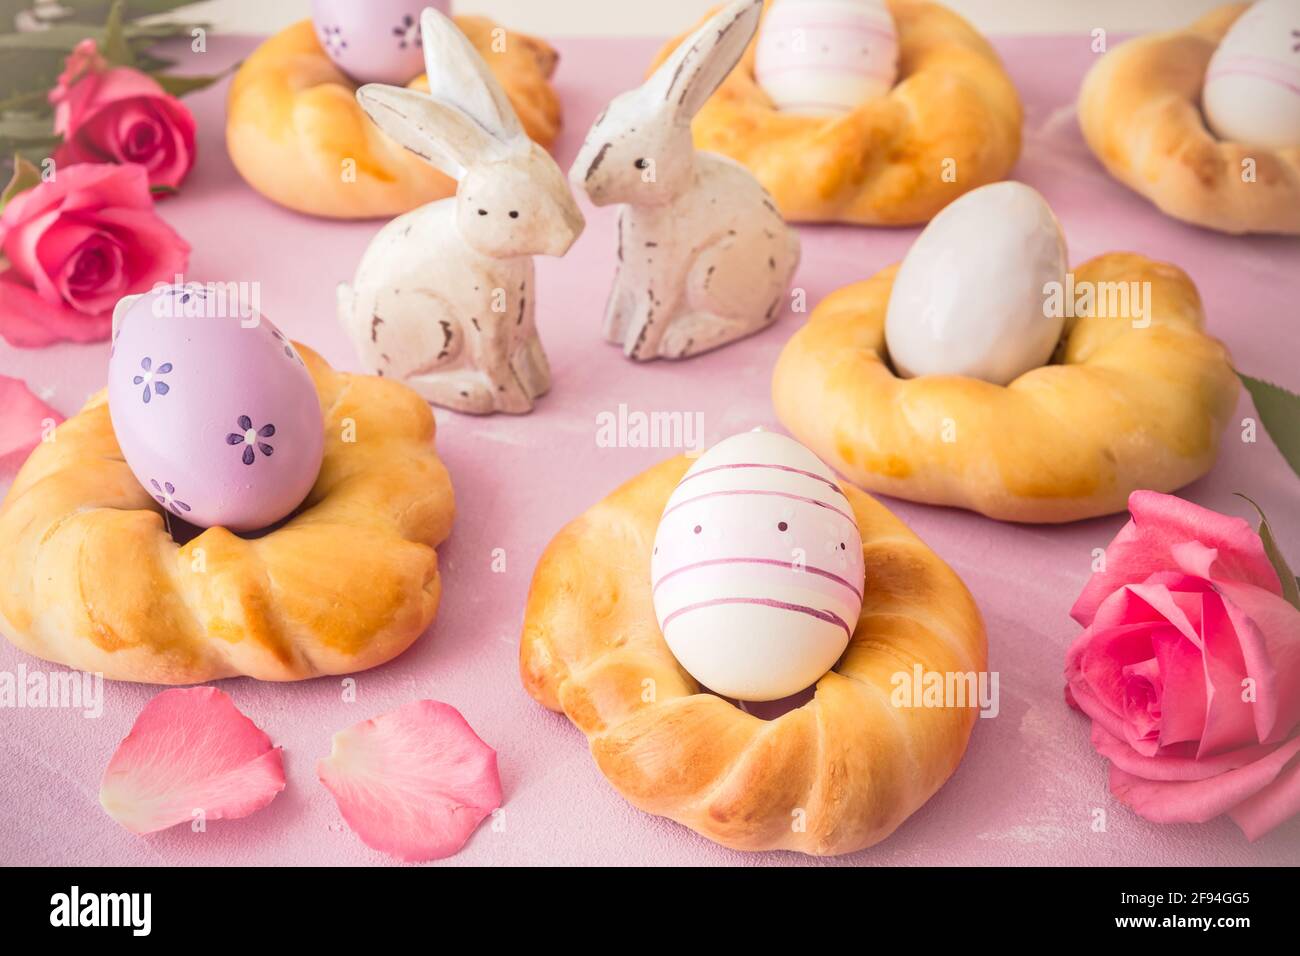 Homemade easter buns with colorful easter eggs on pinkish background Stock Photo